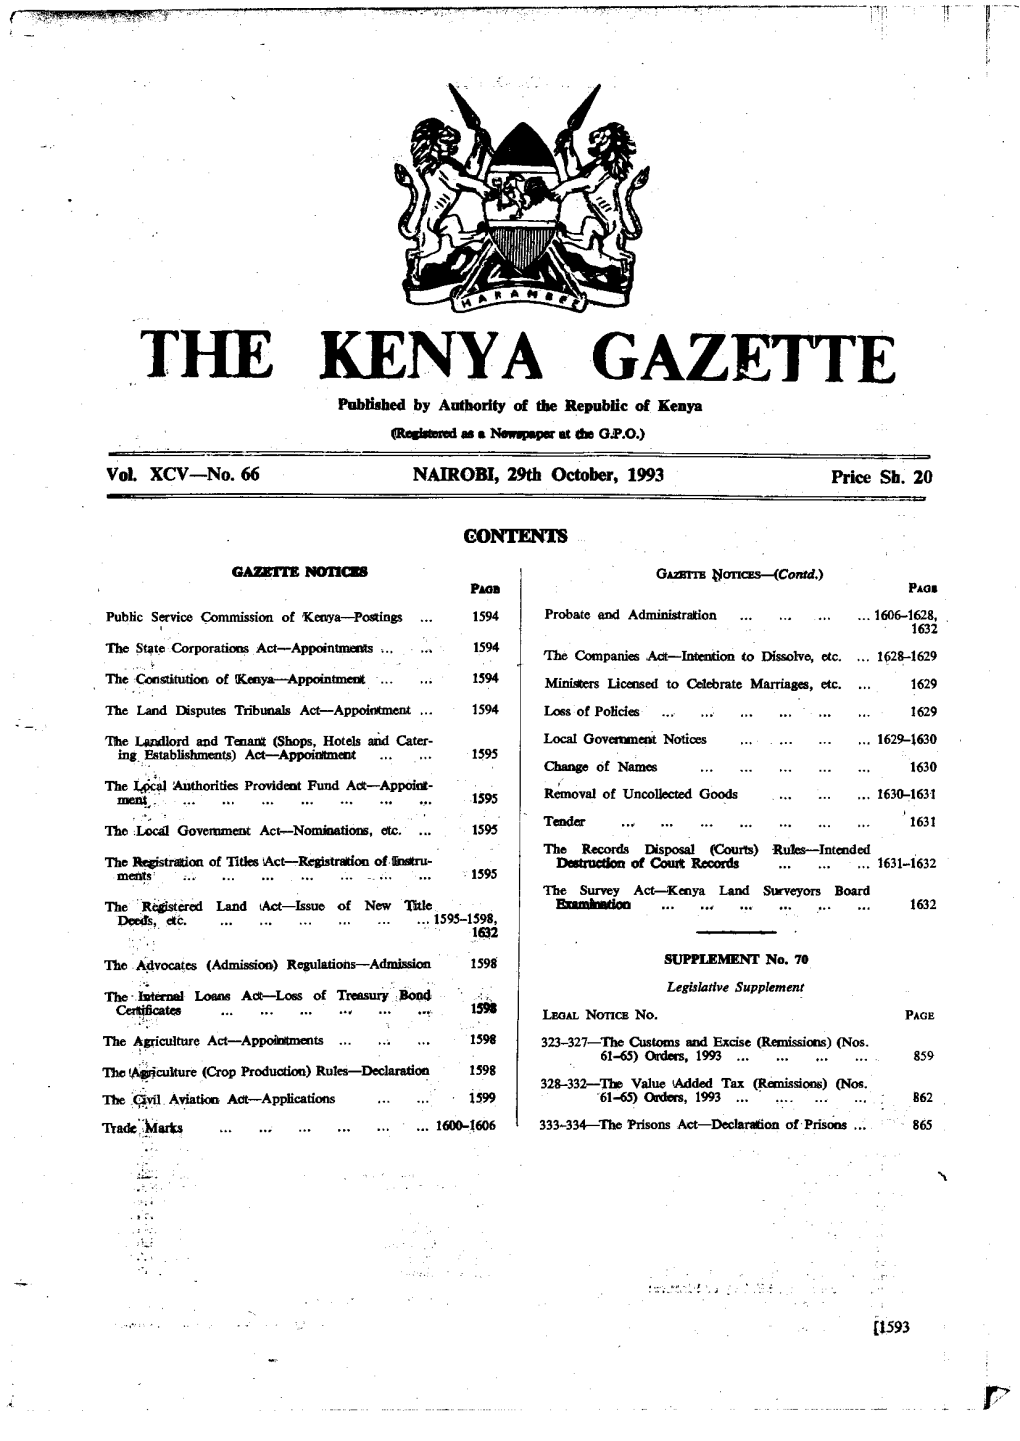 THE KENYA GAZETTE Published by Authority of the Republic of Kenya (Reamed As a Northam at the 02.0.) � Vol